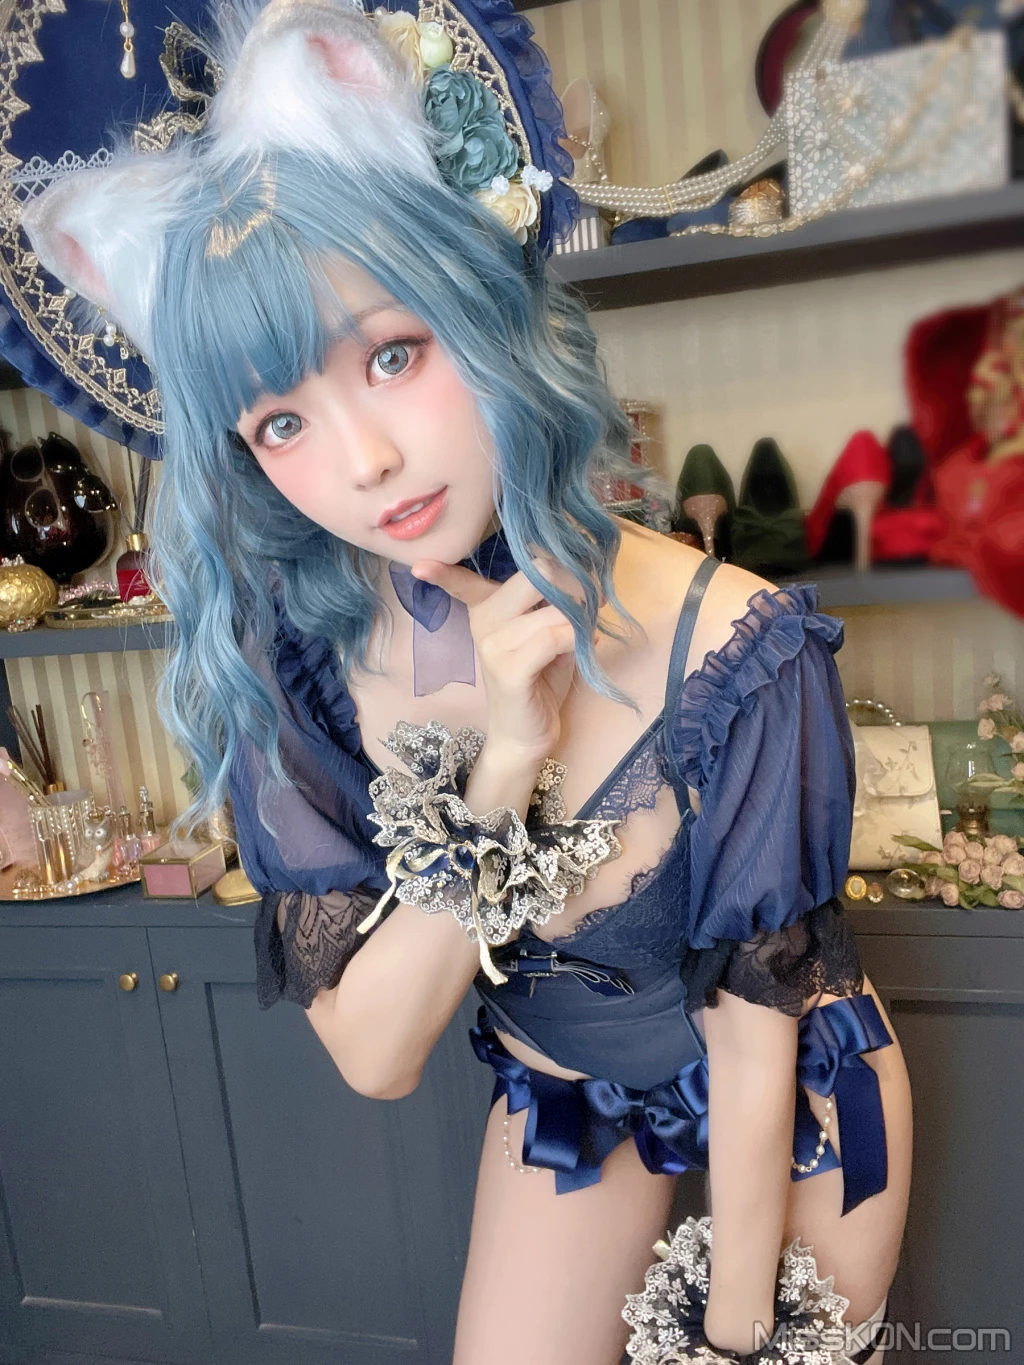 Coser@Ely_eee (ElyEE子): Scottish Fold Cat Doll (摺耳貓少女人形) (60 photos)(5)